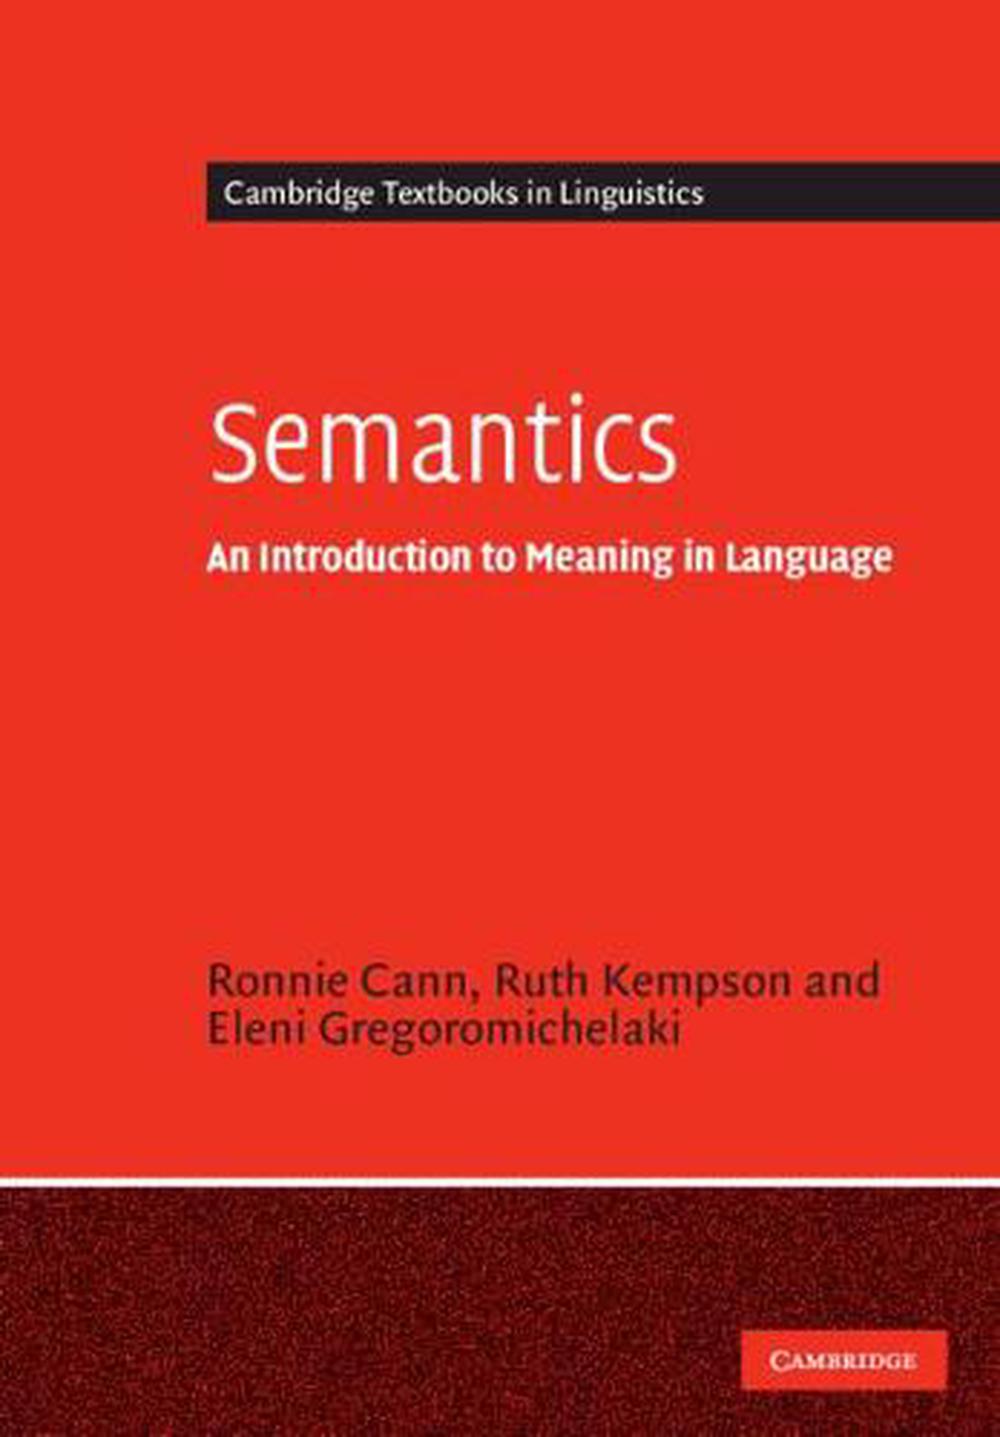 Semantics: An Introduction to Meaning in Language by Ronnie Cann ...
